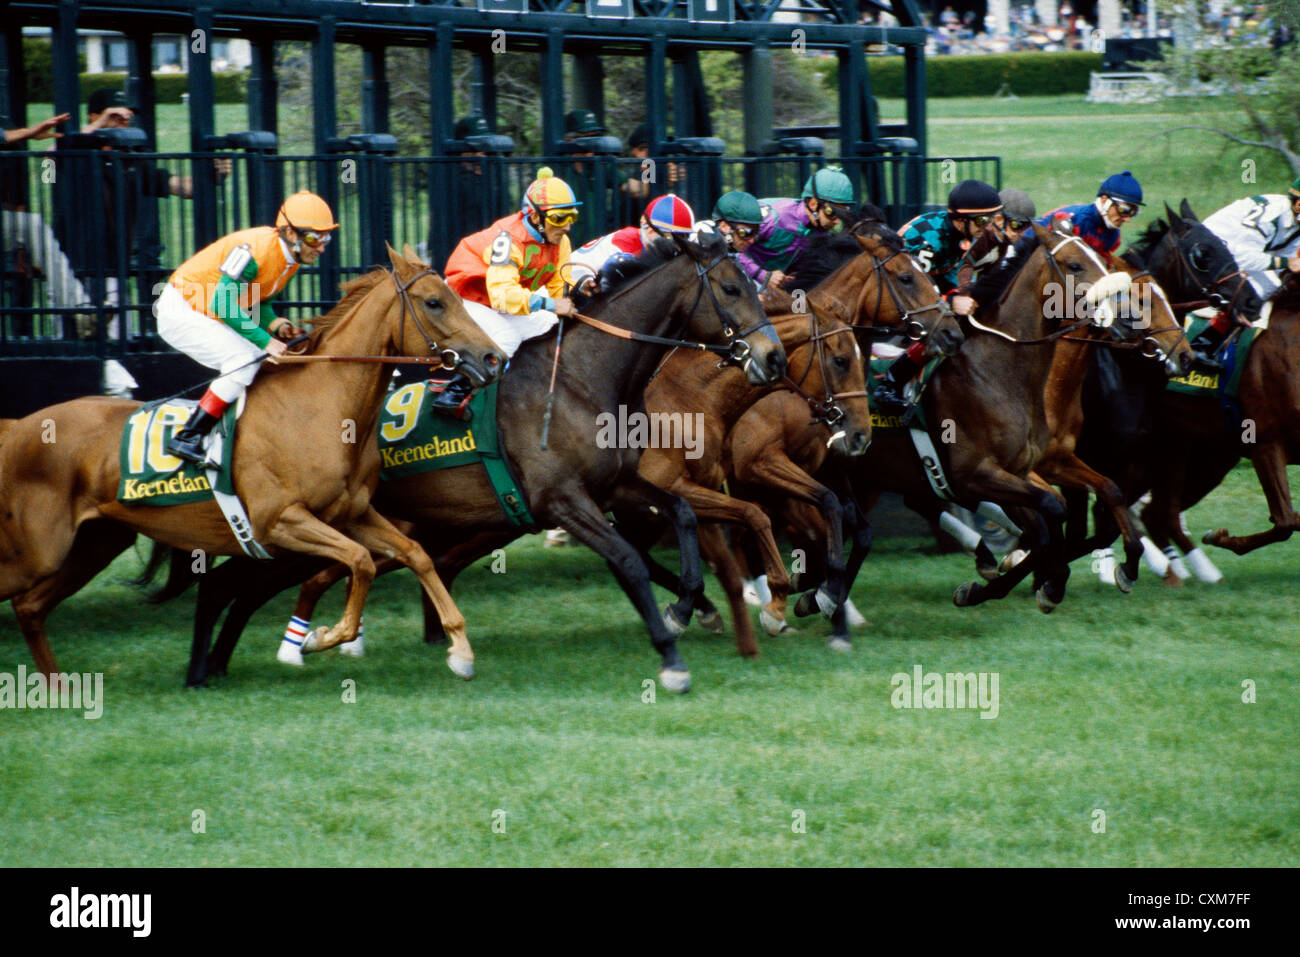 THOROUGHBRED HORSE RACING AT THE STARTING GATE / KEENELAND RACE COURSE, LEXINGTON KENTUCKY Stock Photo